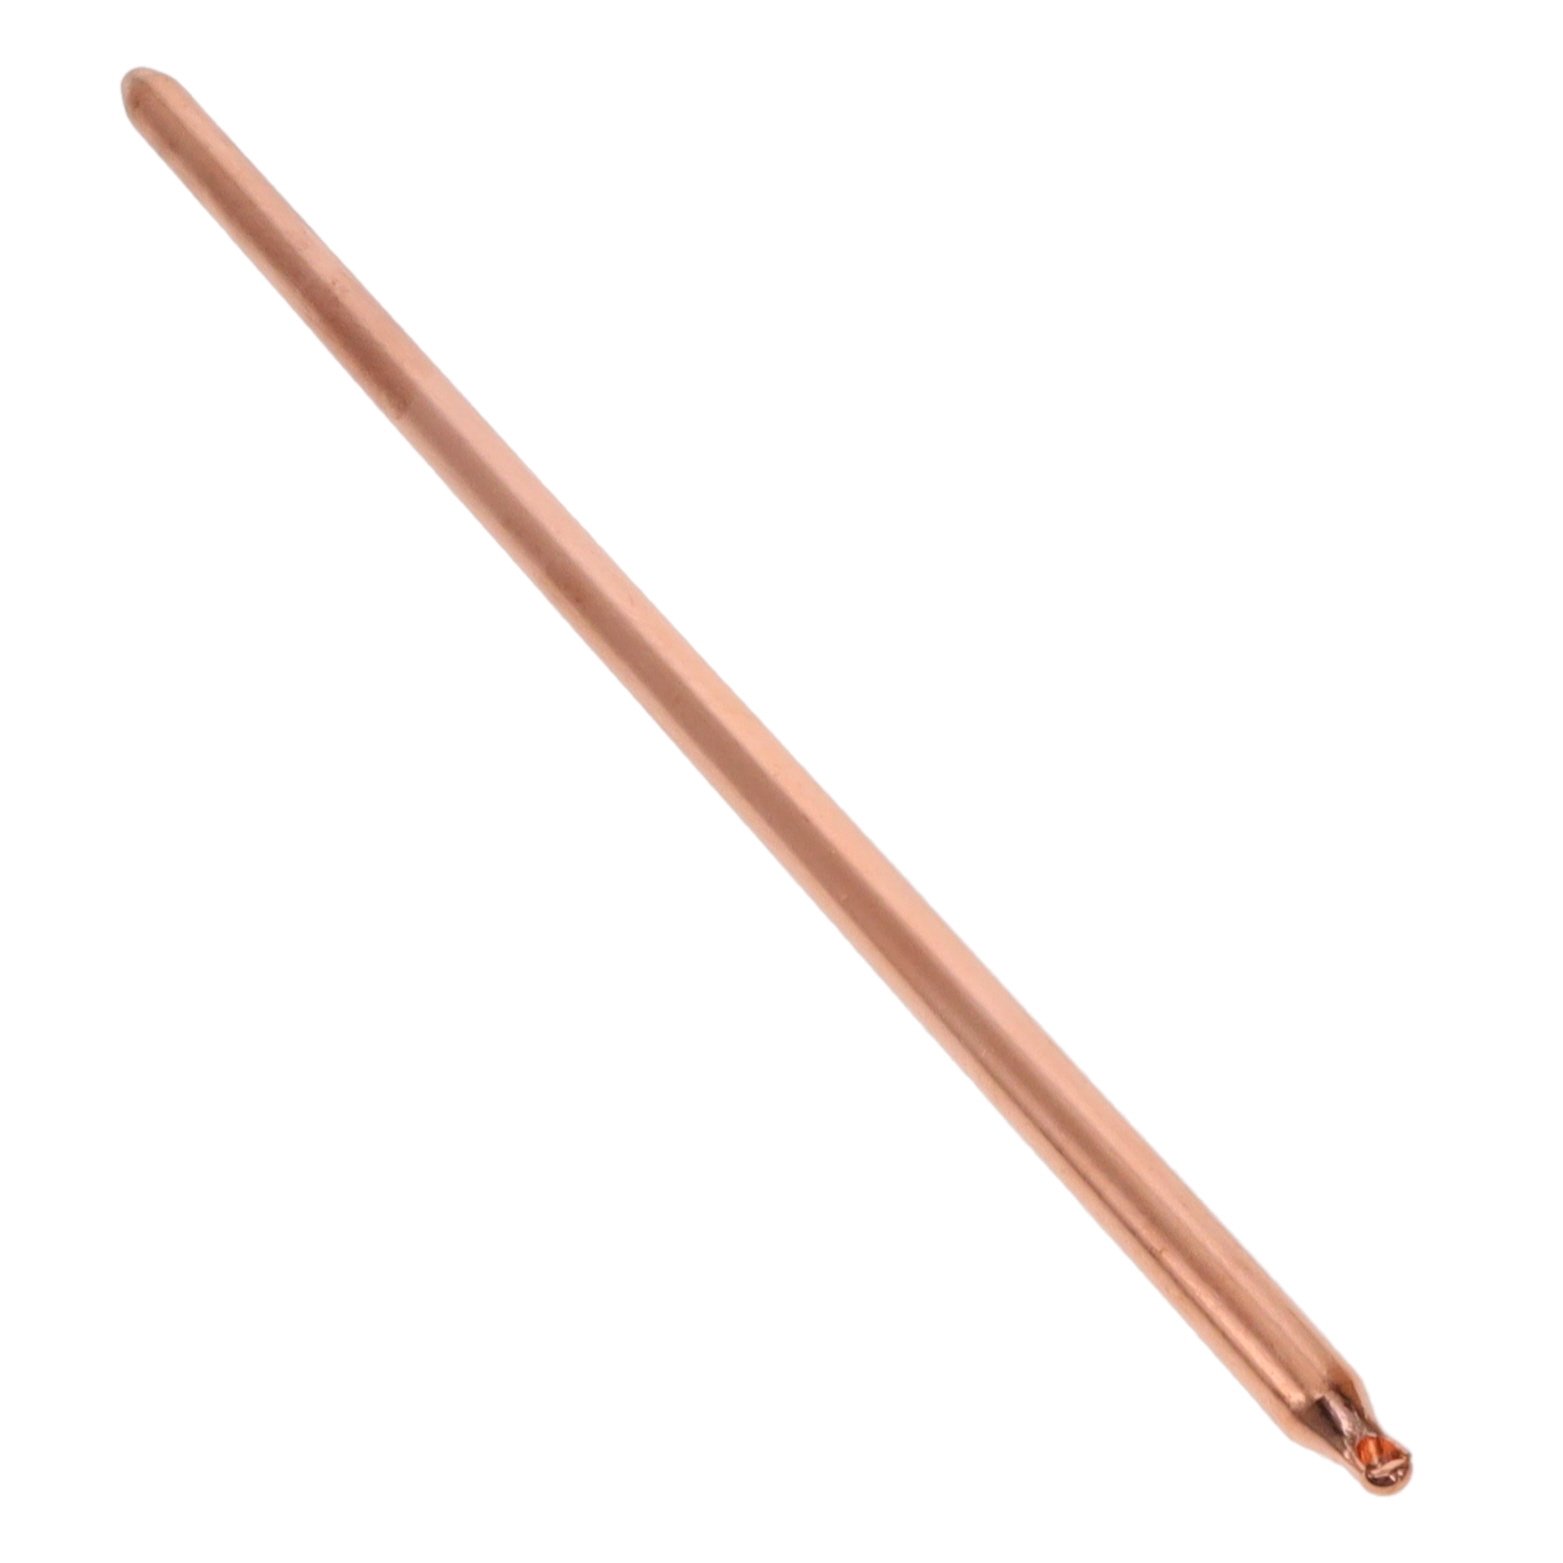 【HP-CWS-R10-321-K】COPPER-WATER HEAT PIPE, ROUND, D